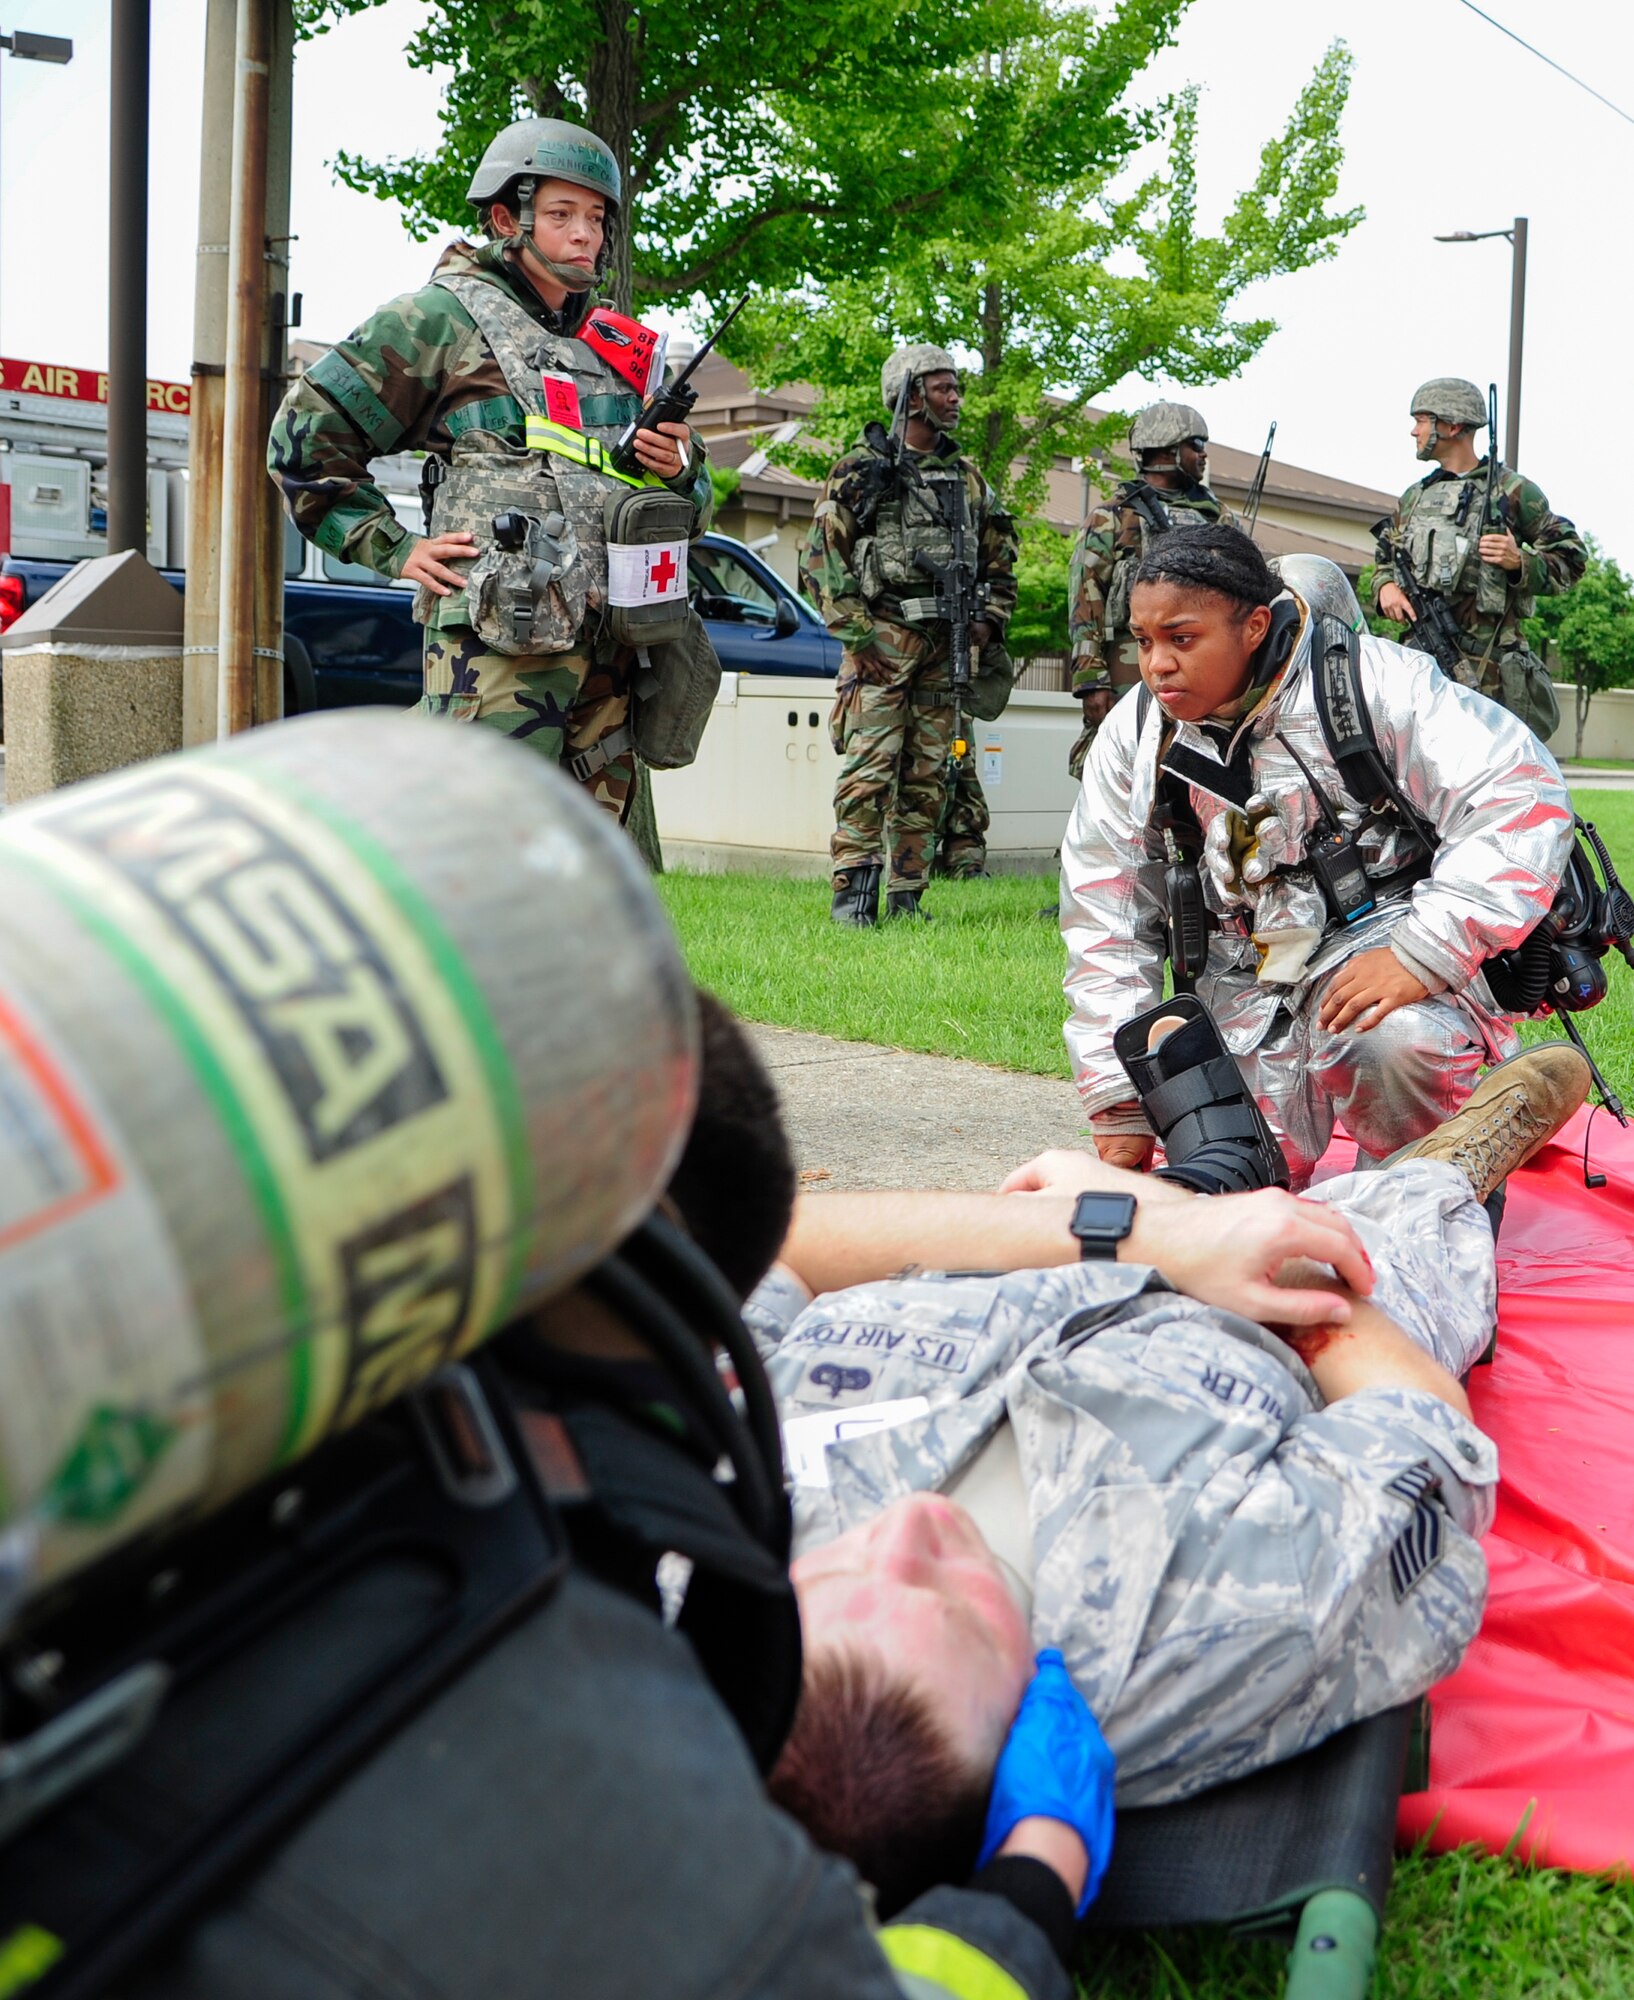 U.S. Air Force Airman 1st Class Rachel Walker-Zamora, 8th Civil Engineering Squadron firefighter, prepares to strap a simulated car accident victim to a medical litter during training exercise Beverly Pack 17-3, at Kunsan Air Base, Republic of Korea, Aug. 22, 2017. This exercises tested Kunsan first responders on time and effectiveness during a high stress environment. (U.S. Air Force photo by Senior Airman Colby L. Hardin/Released)